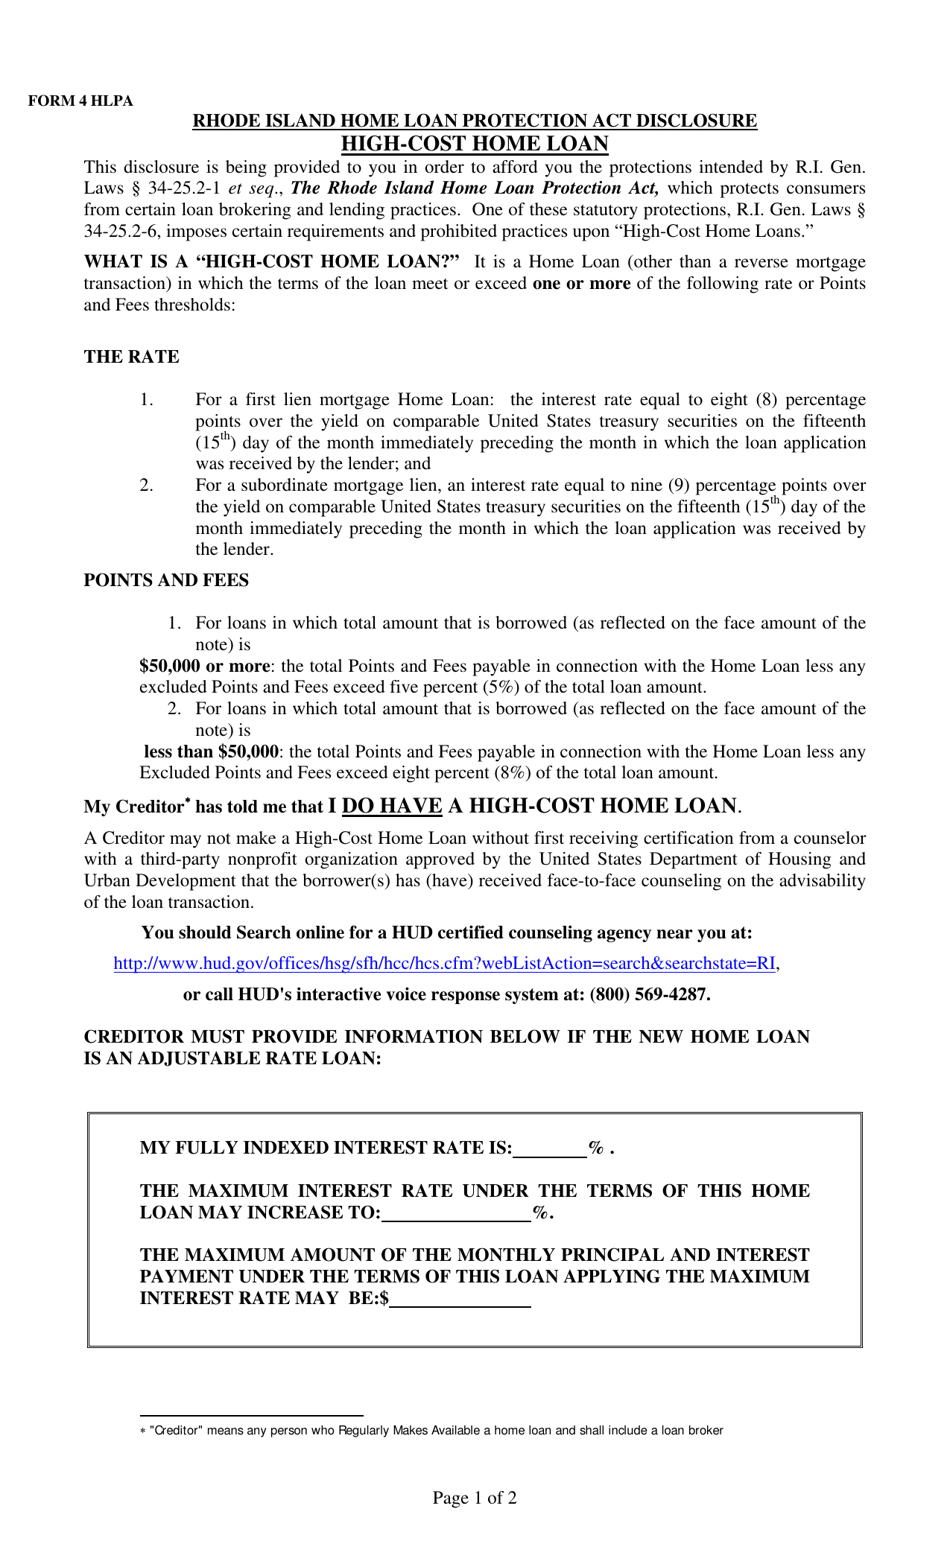 Form 4 Rhode Island Home Loan Protection Act Disclosure High-Cost Home Loan - Rhode Island, Page 1